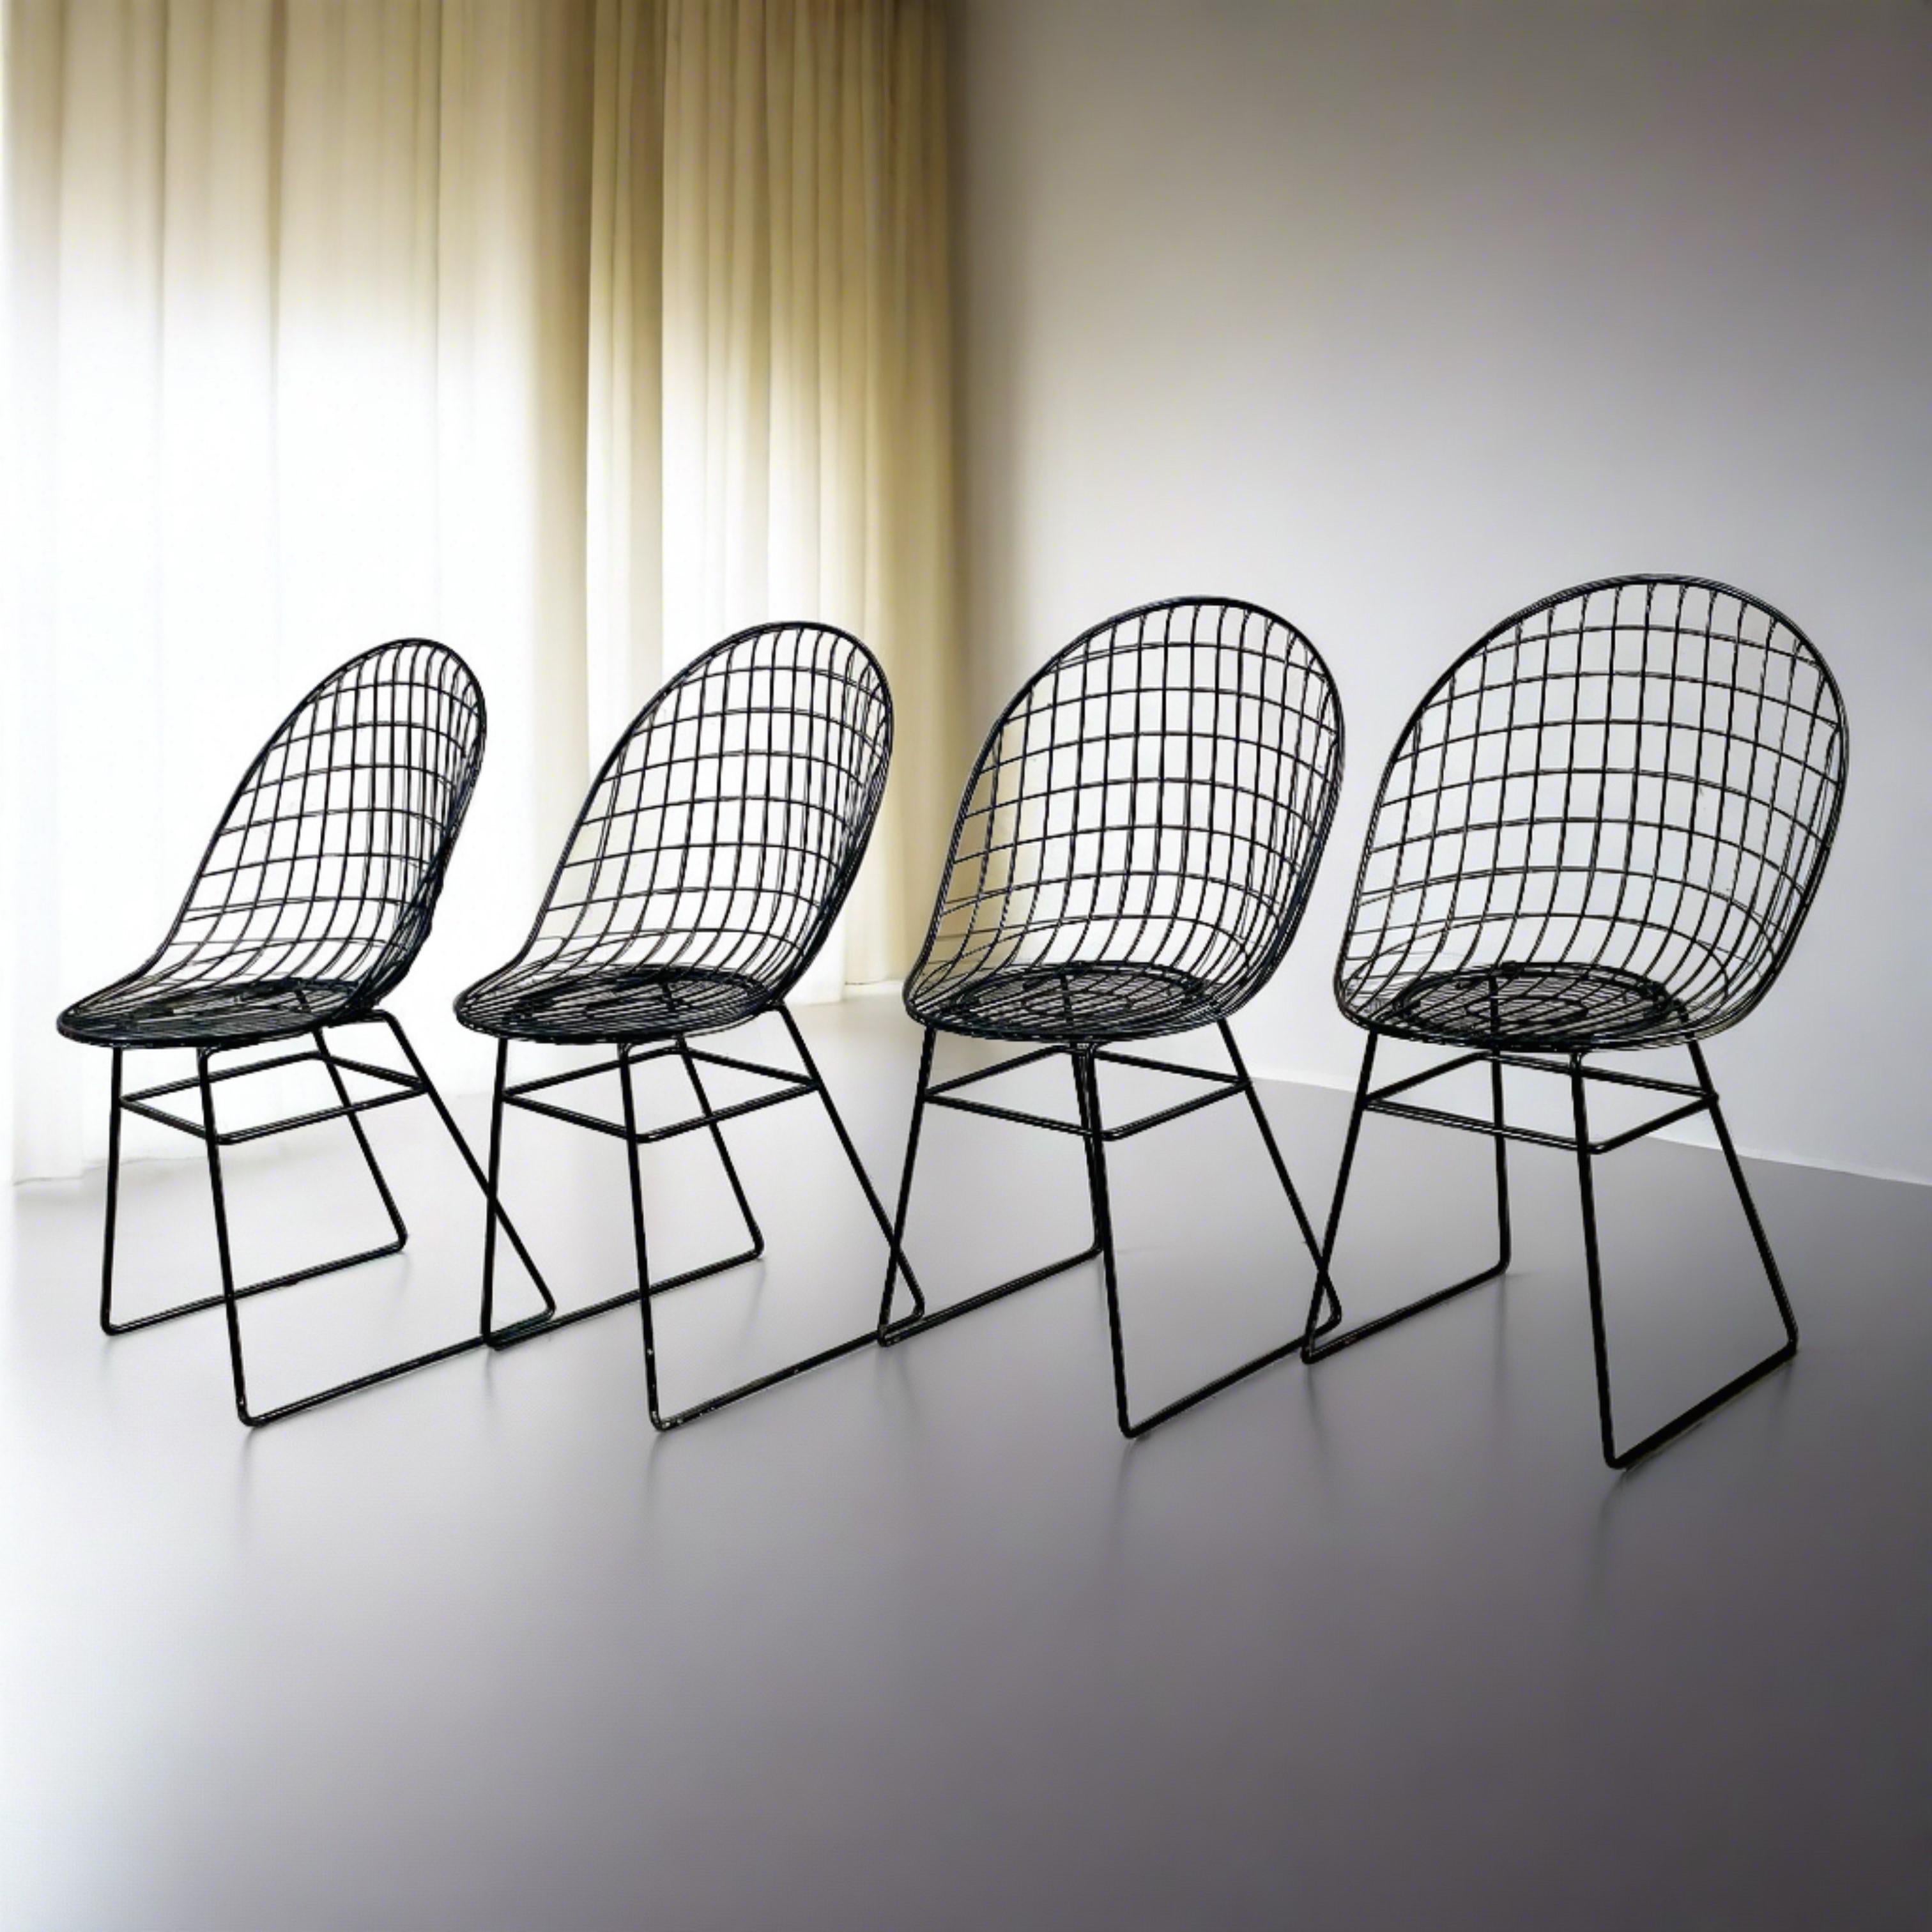 Are you looking to add a touch of mid-century elegance to your dining space? Look no further than this exquisite set of 4 early edition Wire chairs by renowned designers Cees Braakman and A.Dekker for UMS Pastoe, dating back to the 1950s. These